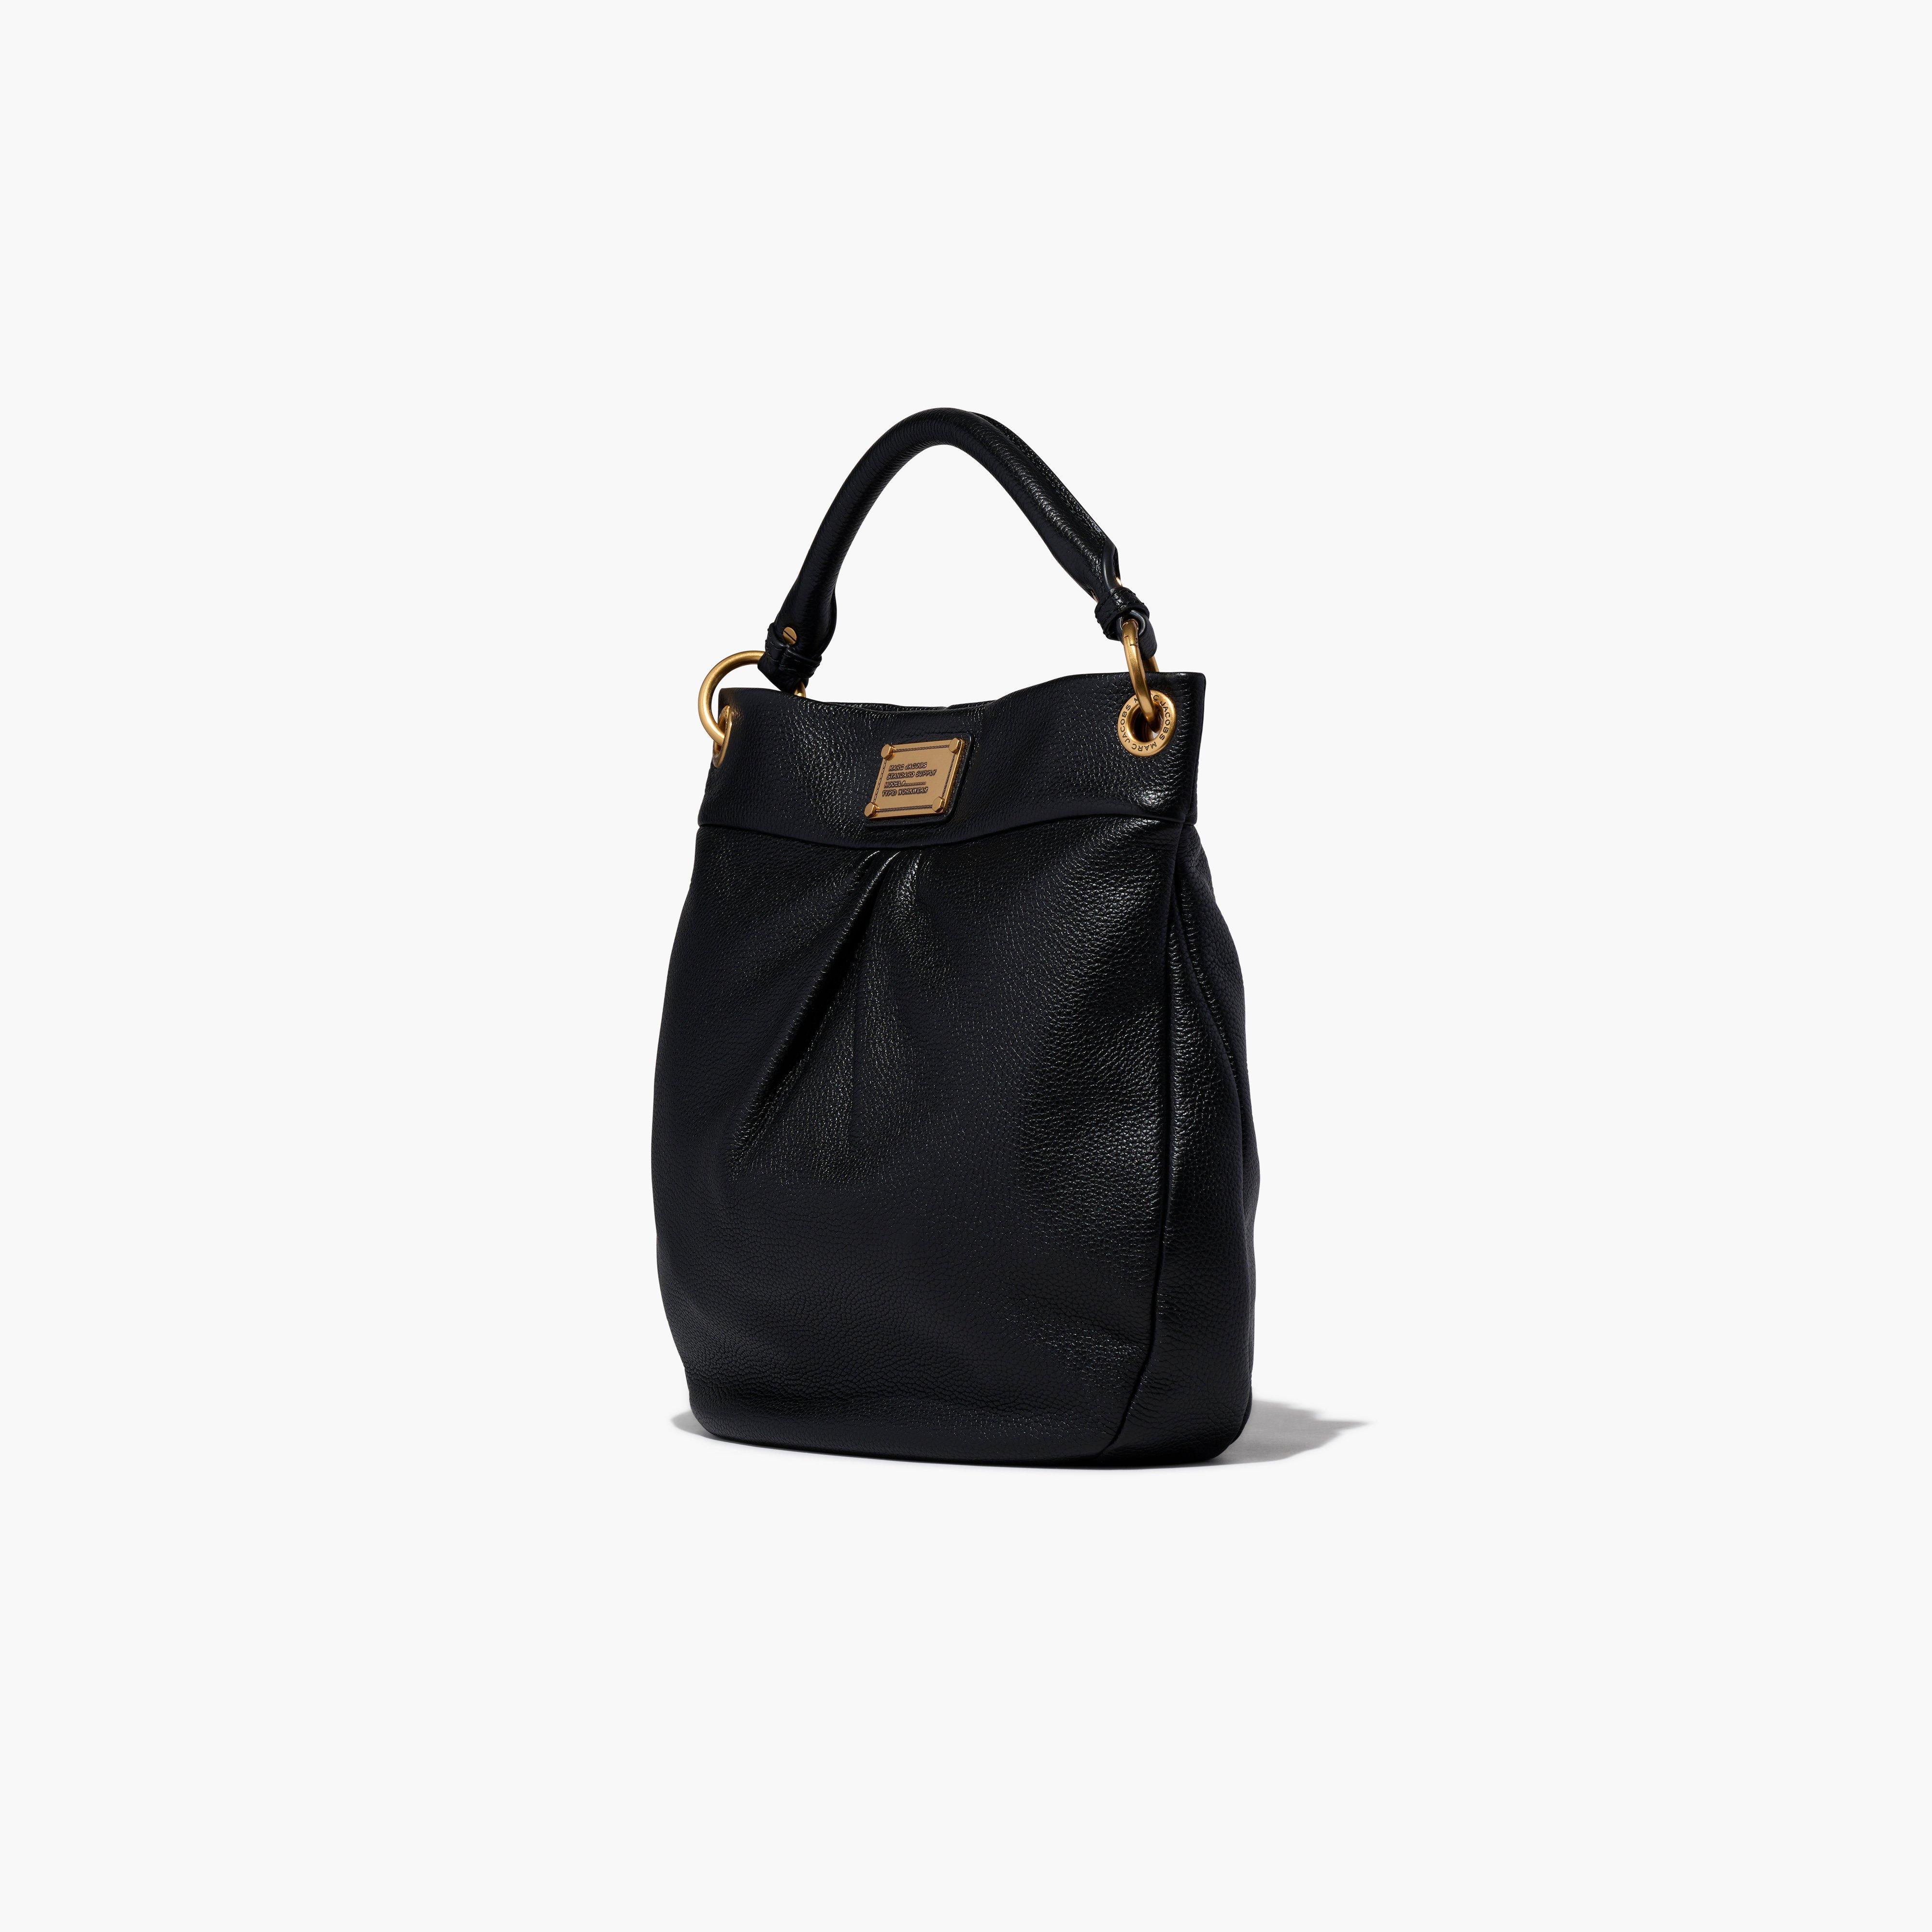 Marc Jacobs Re-edition Hillier Hobo in Black |